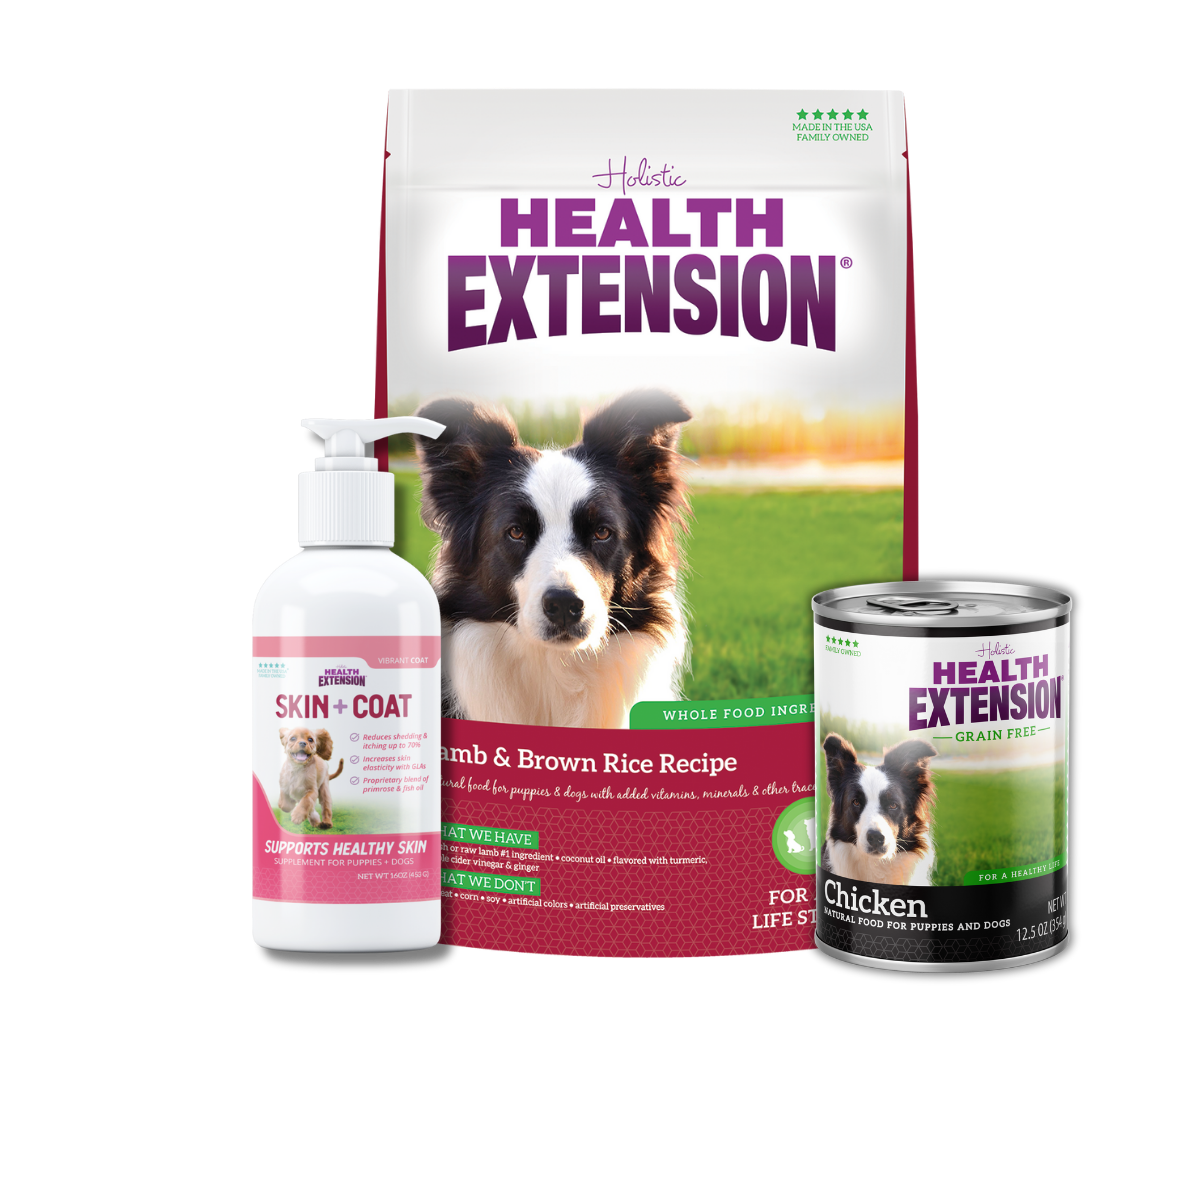 Puppy Trial Bundle for Large Breed: Health Extension Lamb & Brown Rice Recipe Dry Dog Food, Skin & Coat supplement,  Grain Free 95% high-grade chicken canned dog food